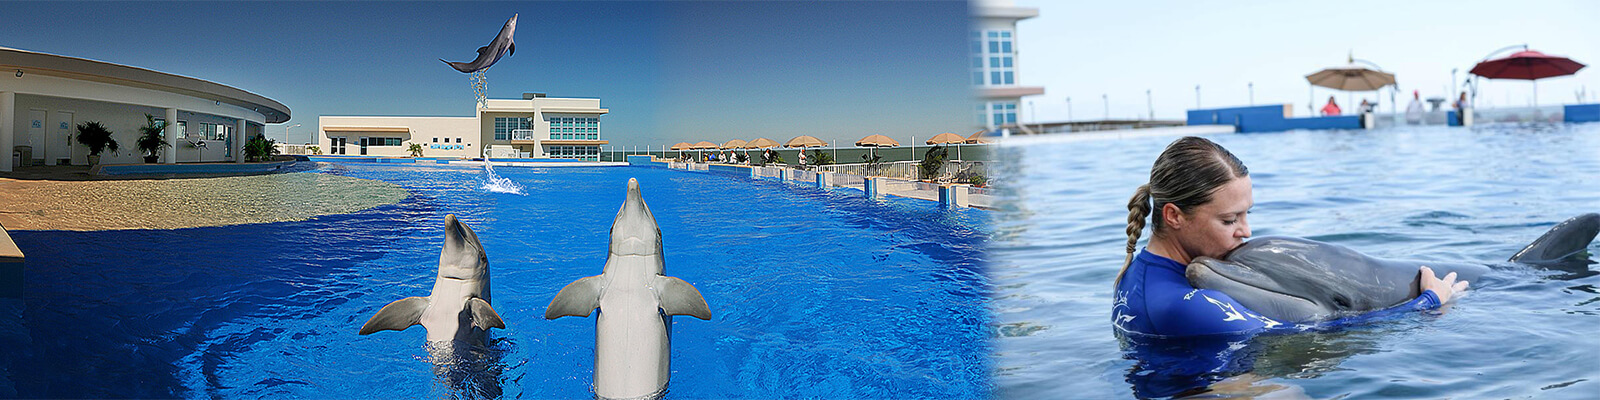 Marineland Dolphin Adventure St Augustine Coupons